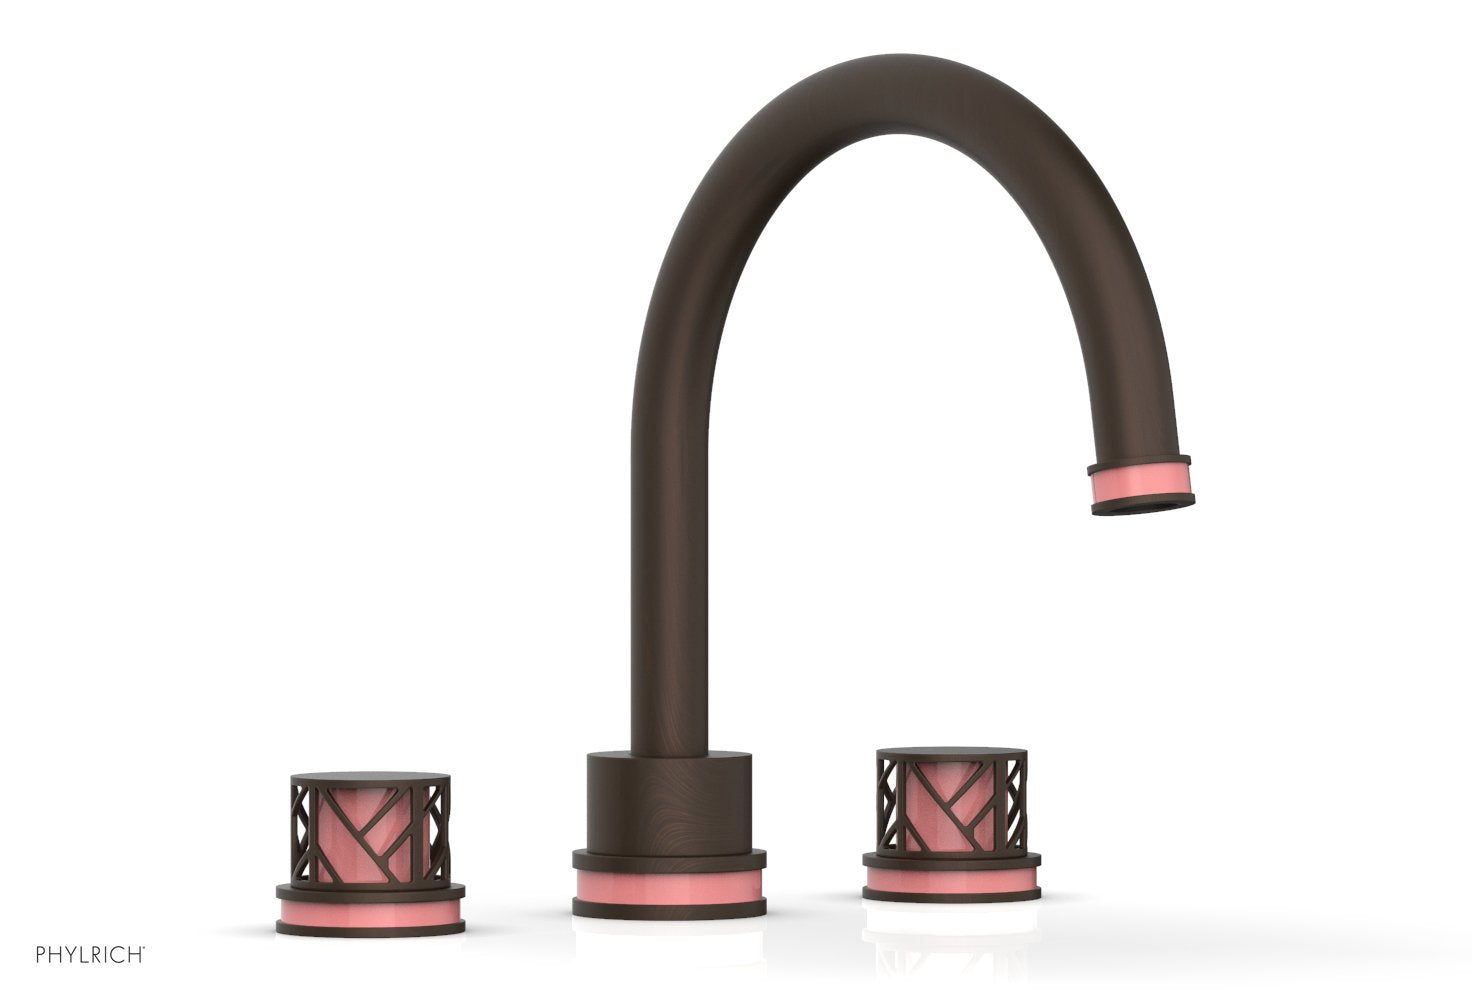 Phylrich JOLIE Deck Tub Set - Round Handles with "Pink" Accents